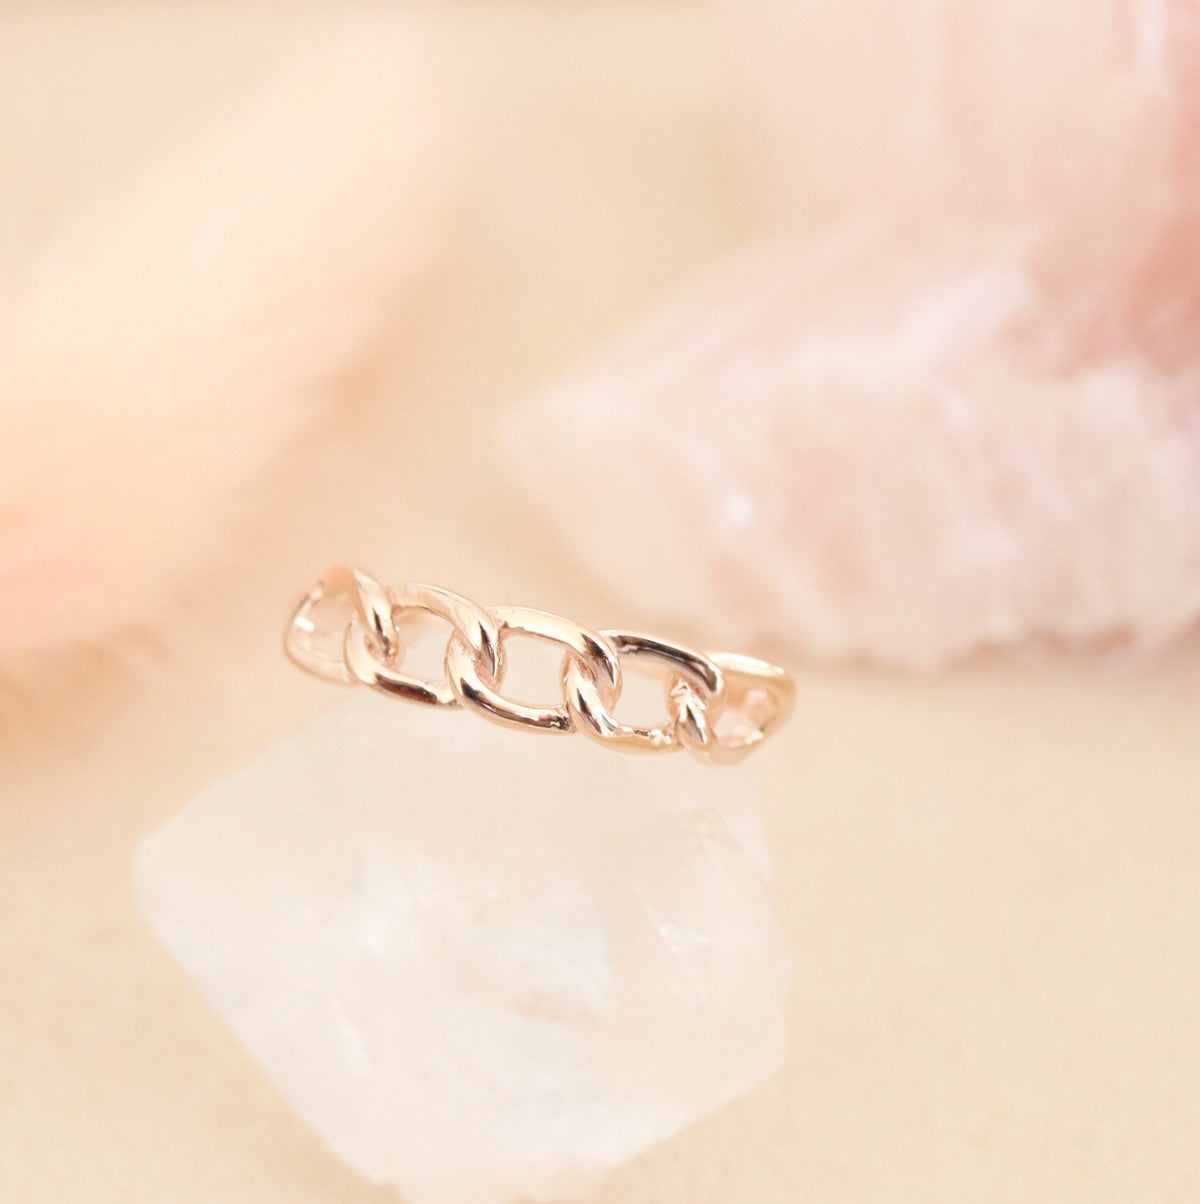 POISE CABLE LINK RING - ROSE GOLD - SO PRETTY CARA COTTER